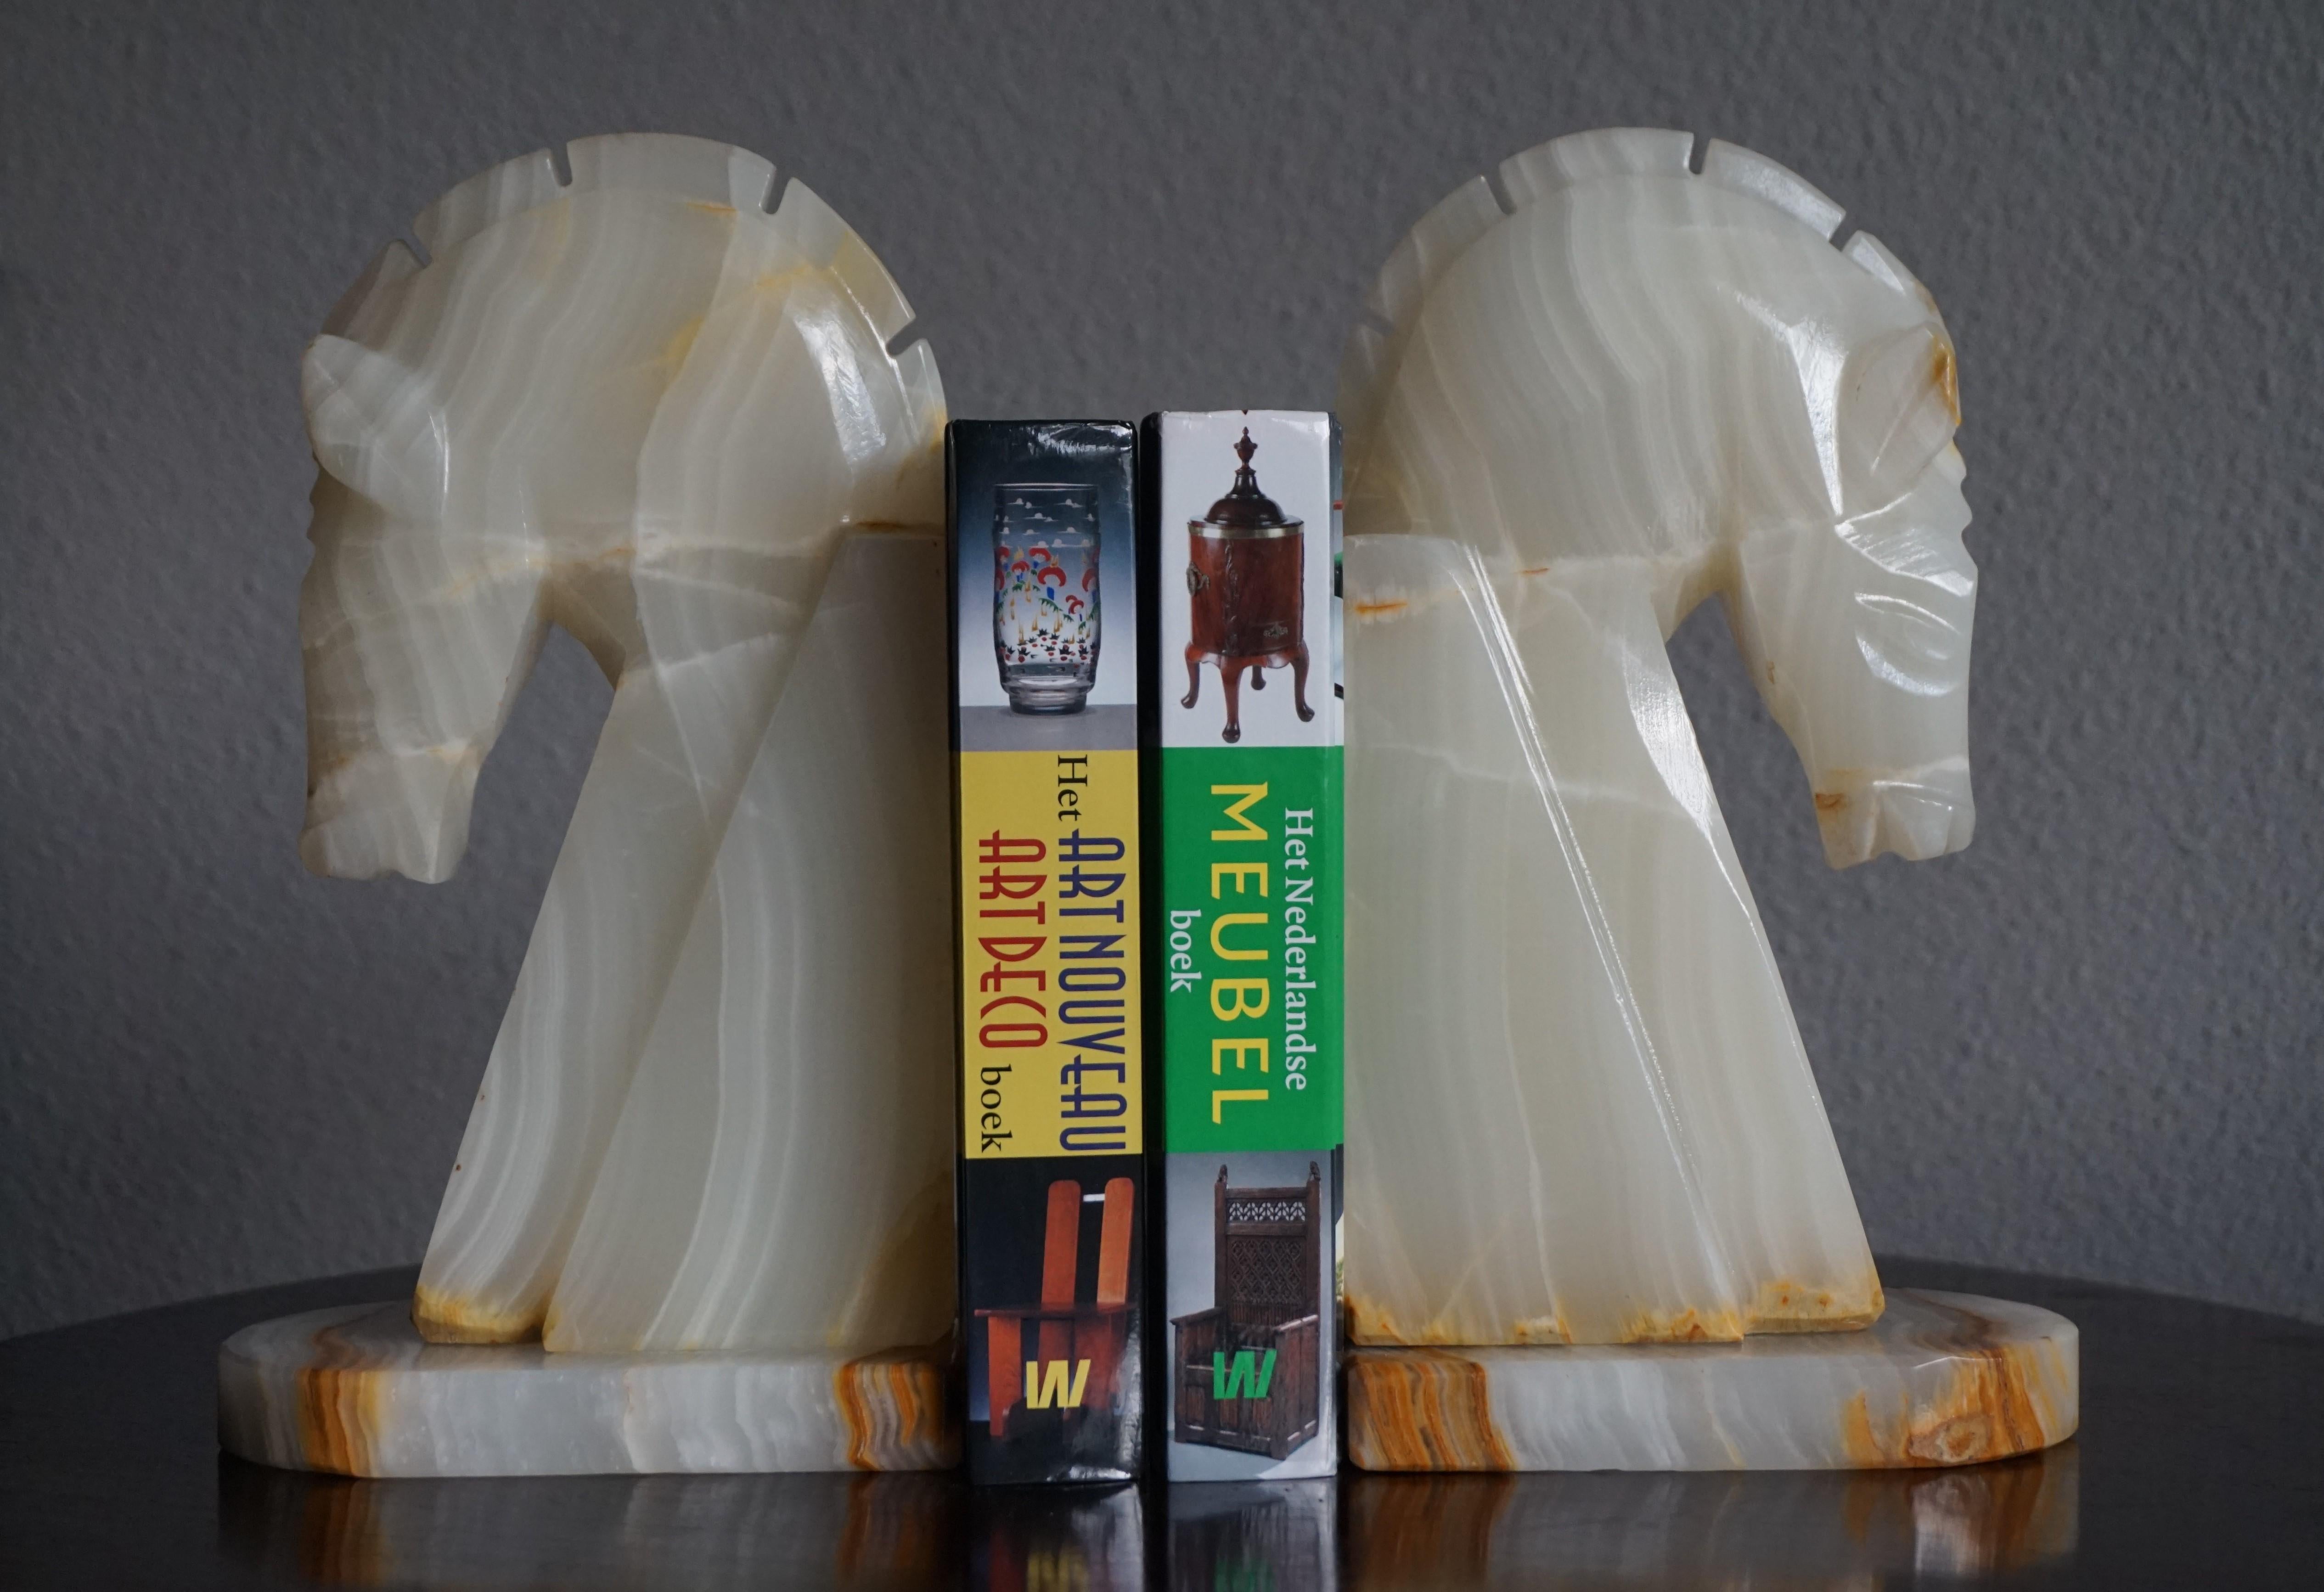 Beautiful, practical and decorative, mineral stone bookends.

The shape of these stunning horse bookends resembles that of chess pieces and their geometrical design is very much Art Deco in style. Because of their design and colors they will look